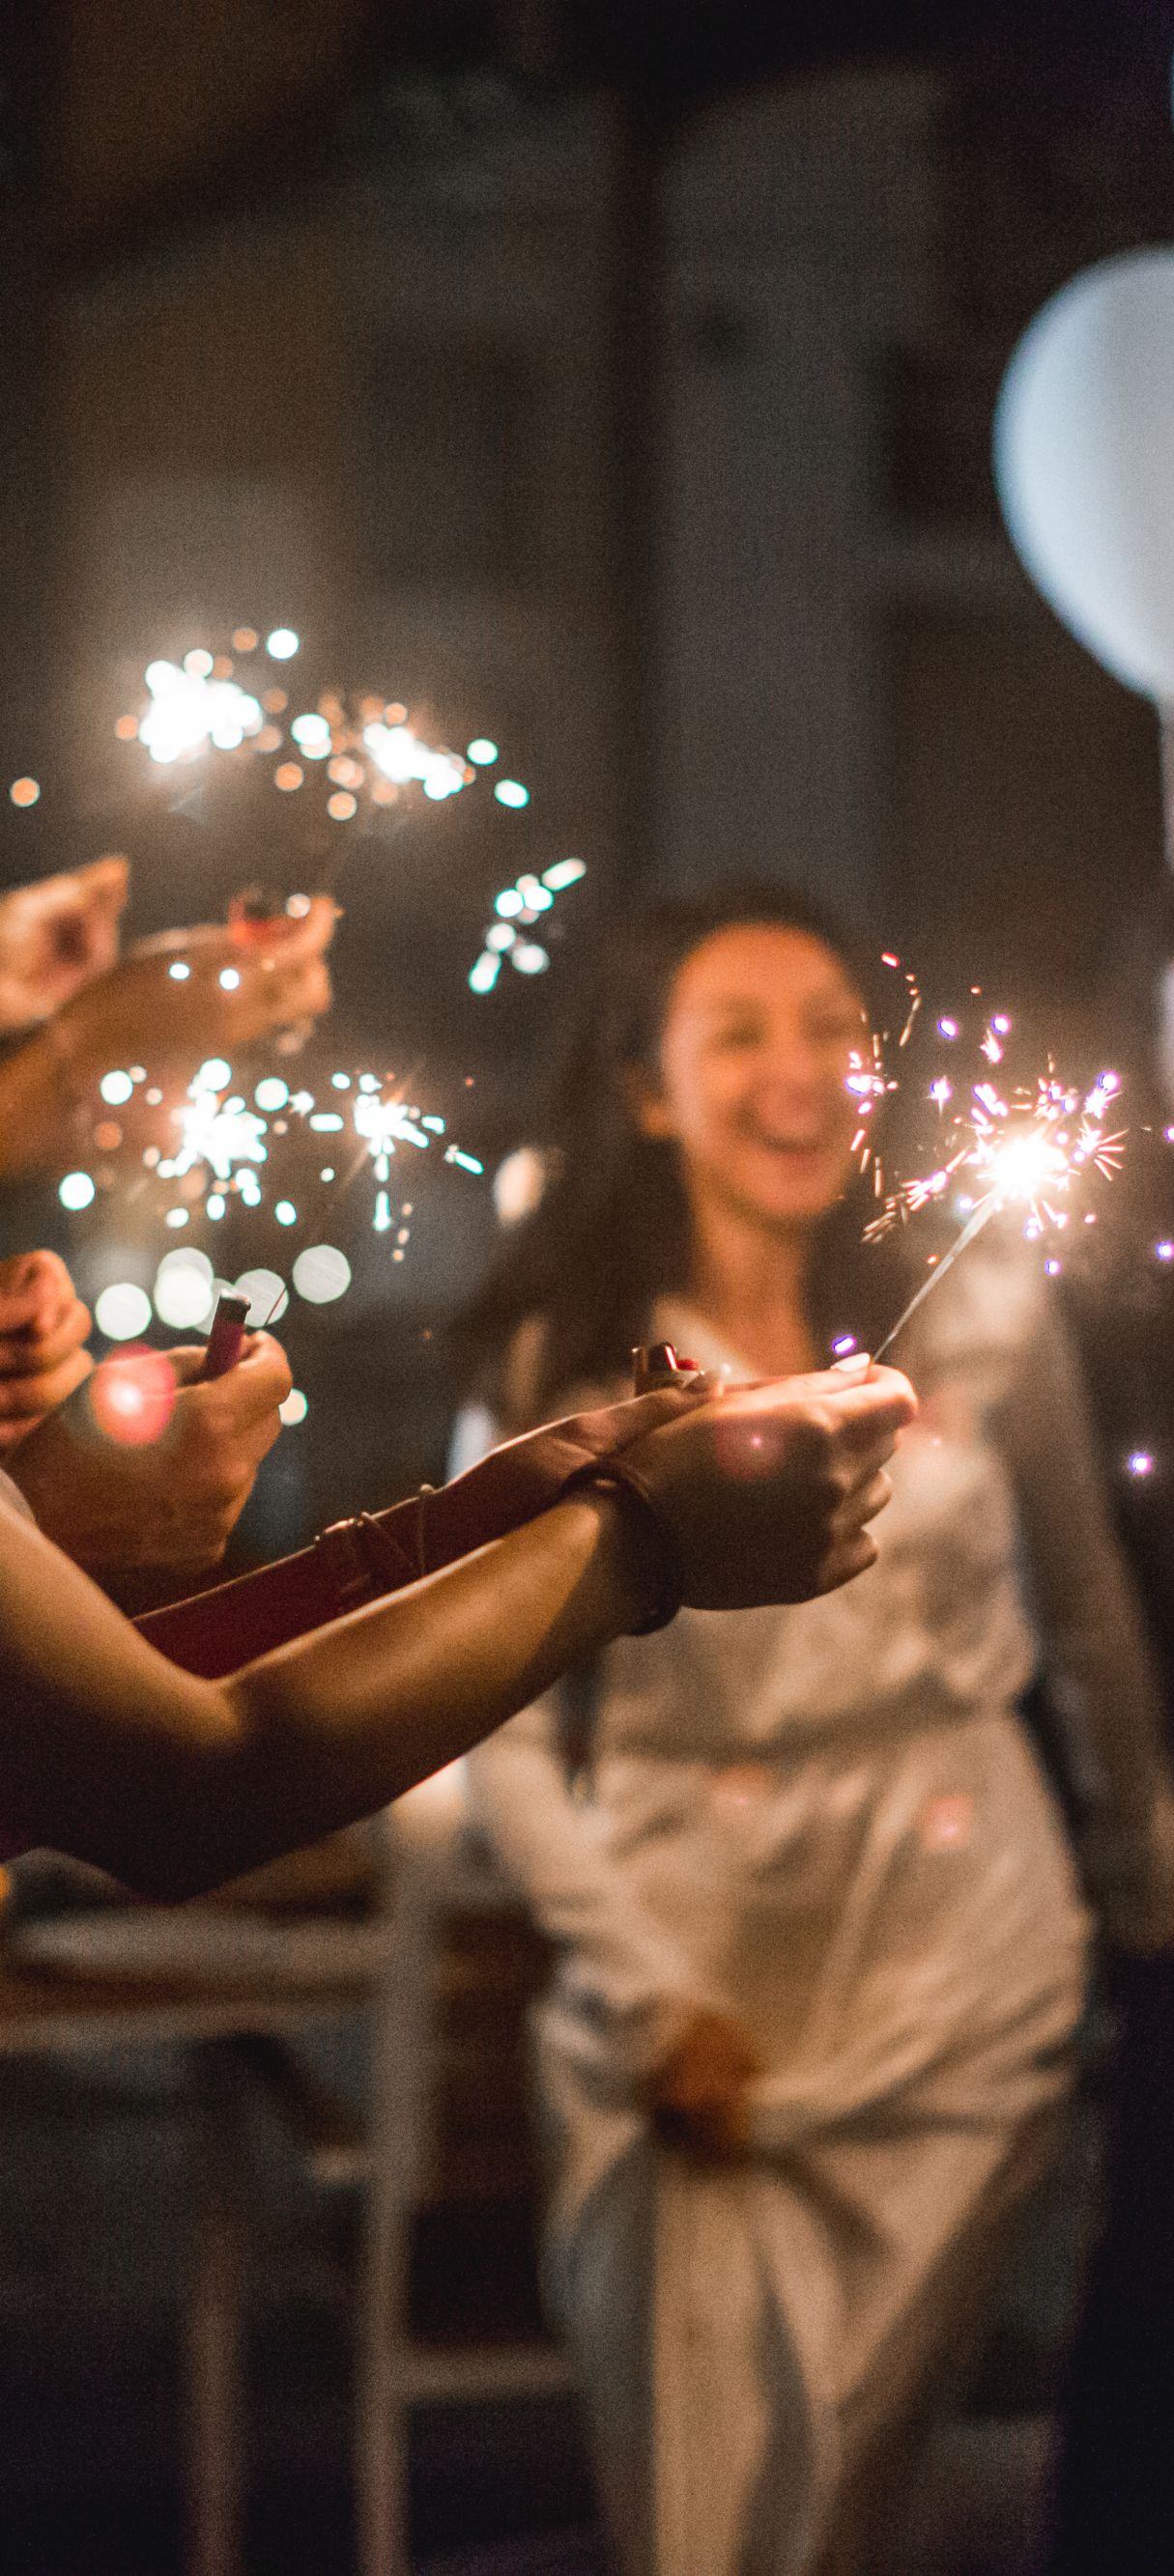 People celebrating newlyweds with sparklers